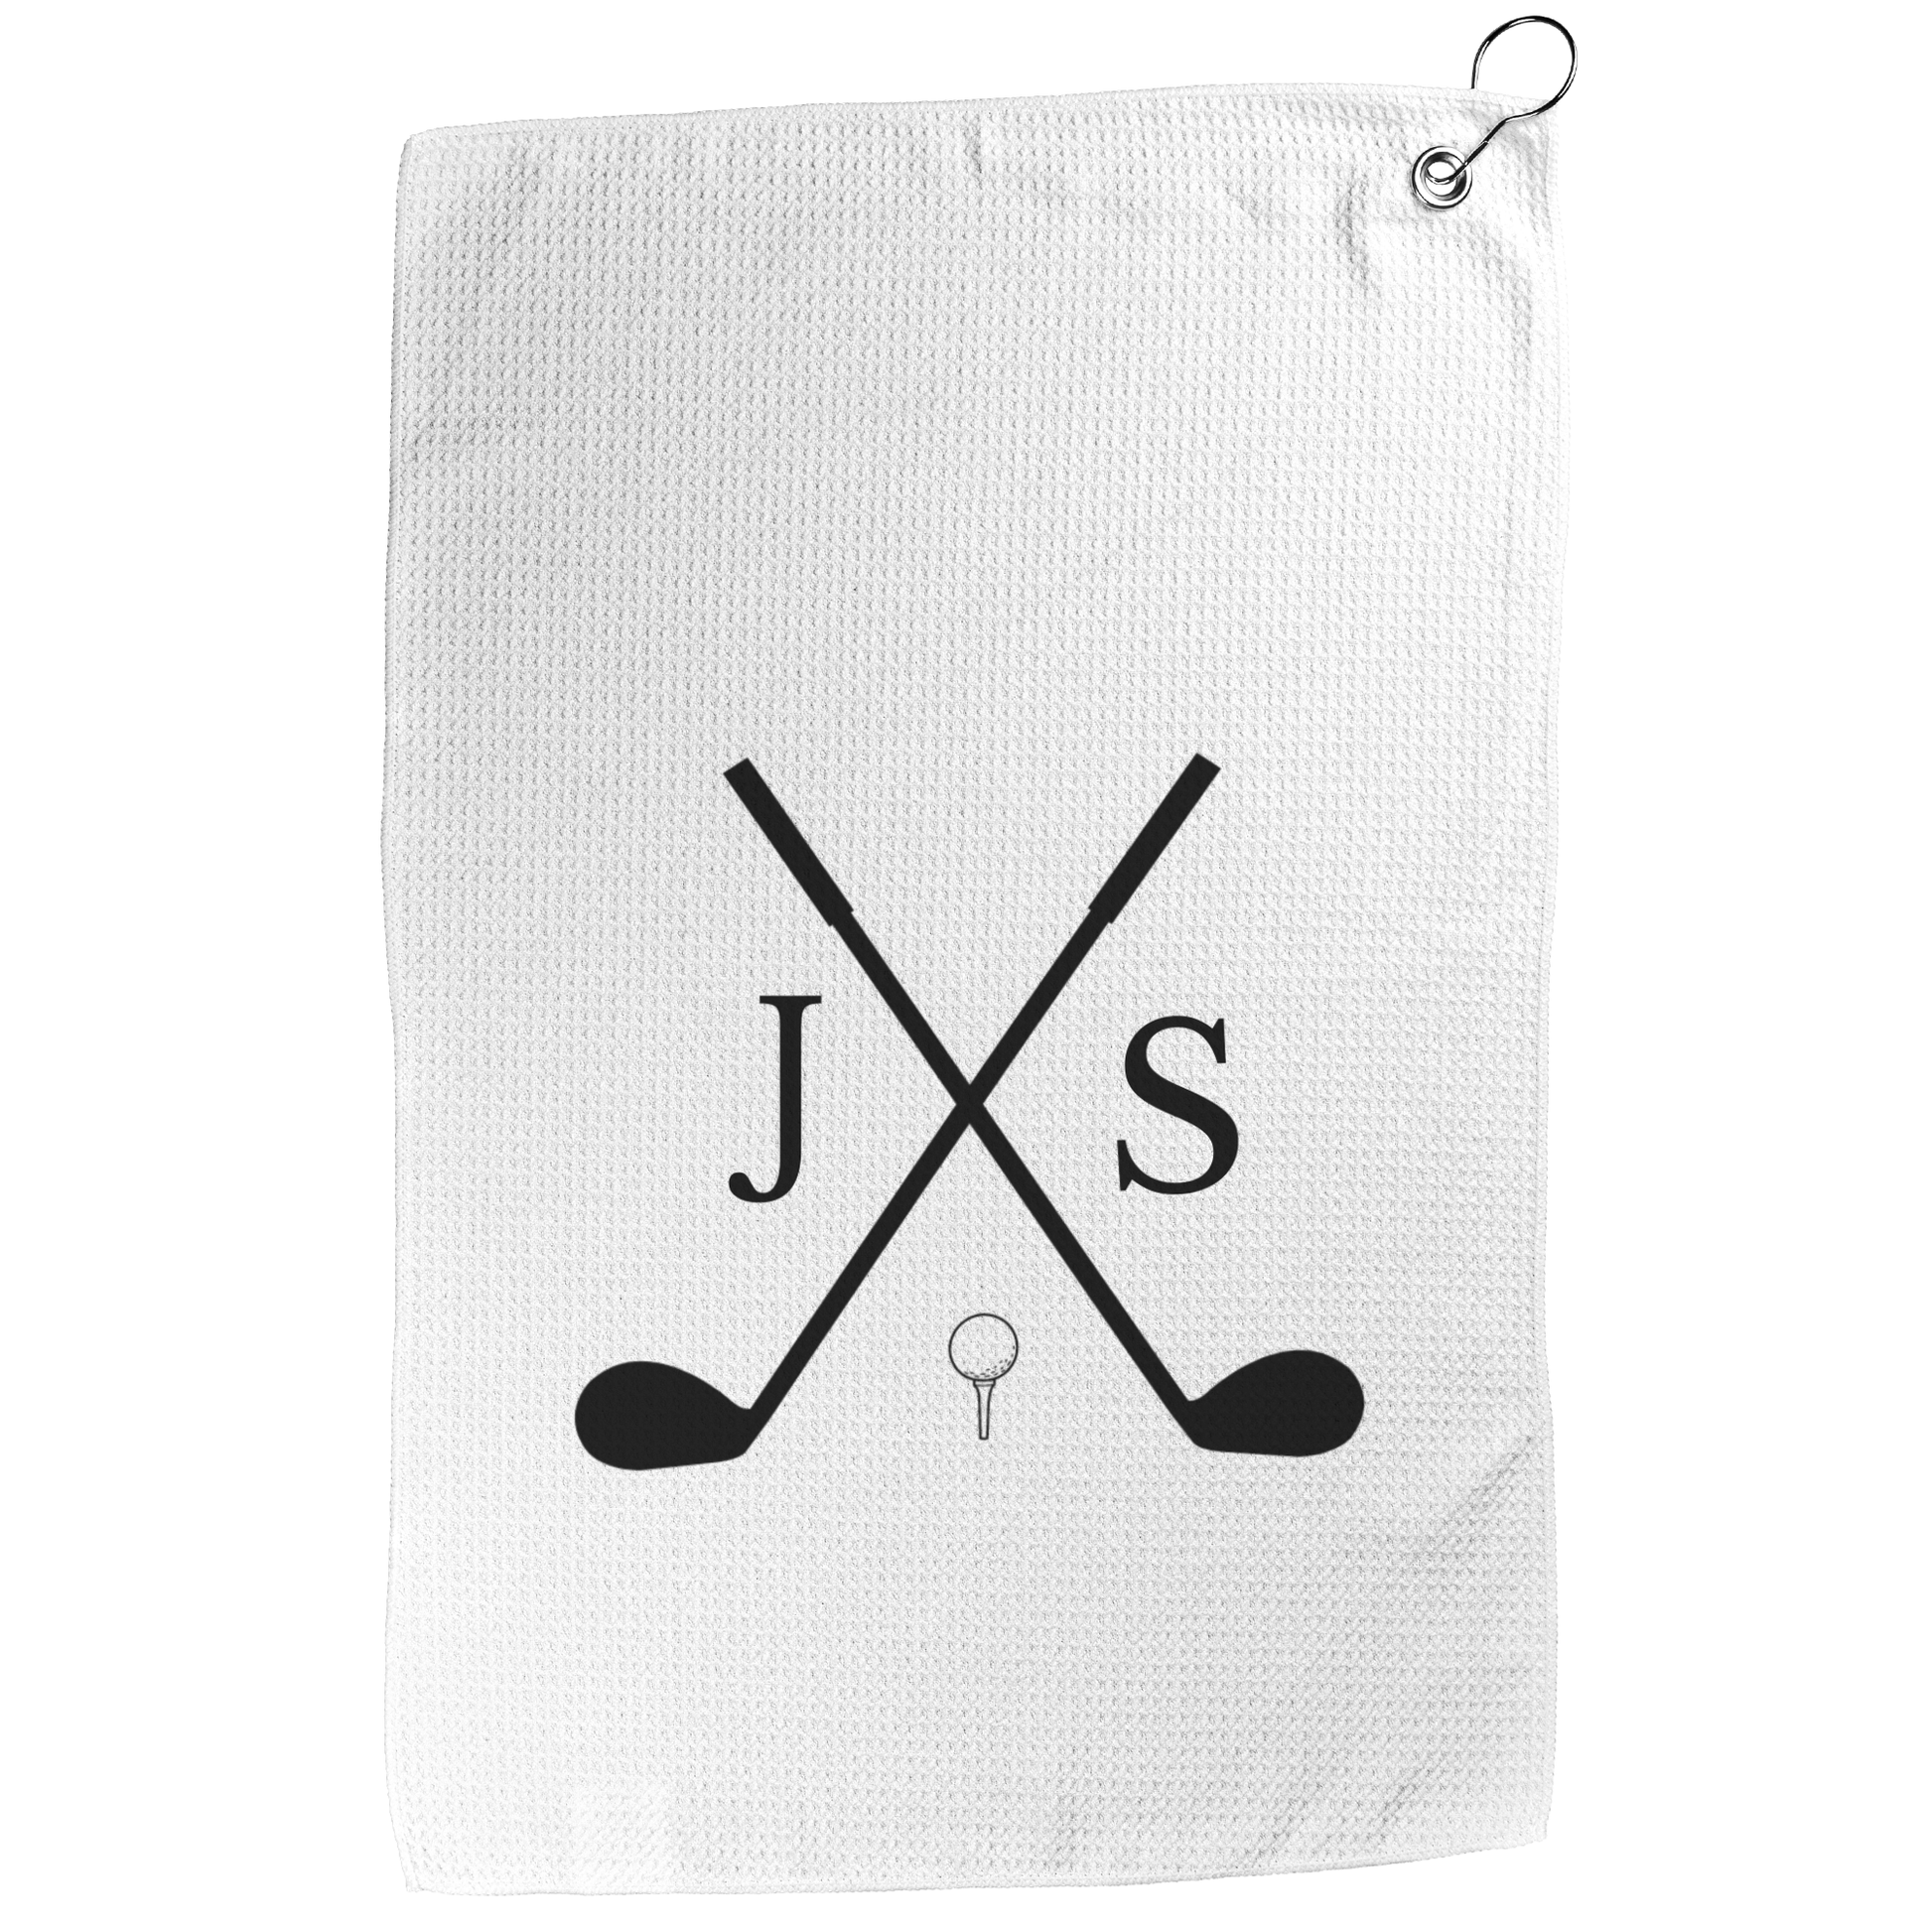 Get trendy with Personalized Waffle Golf Towel -  available at Good Gift Company. Grab yours for $13 today!